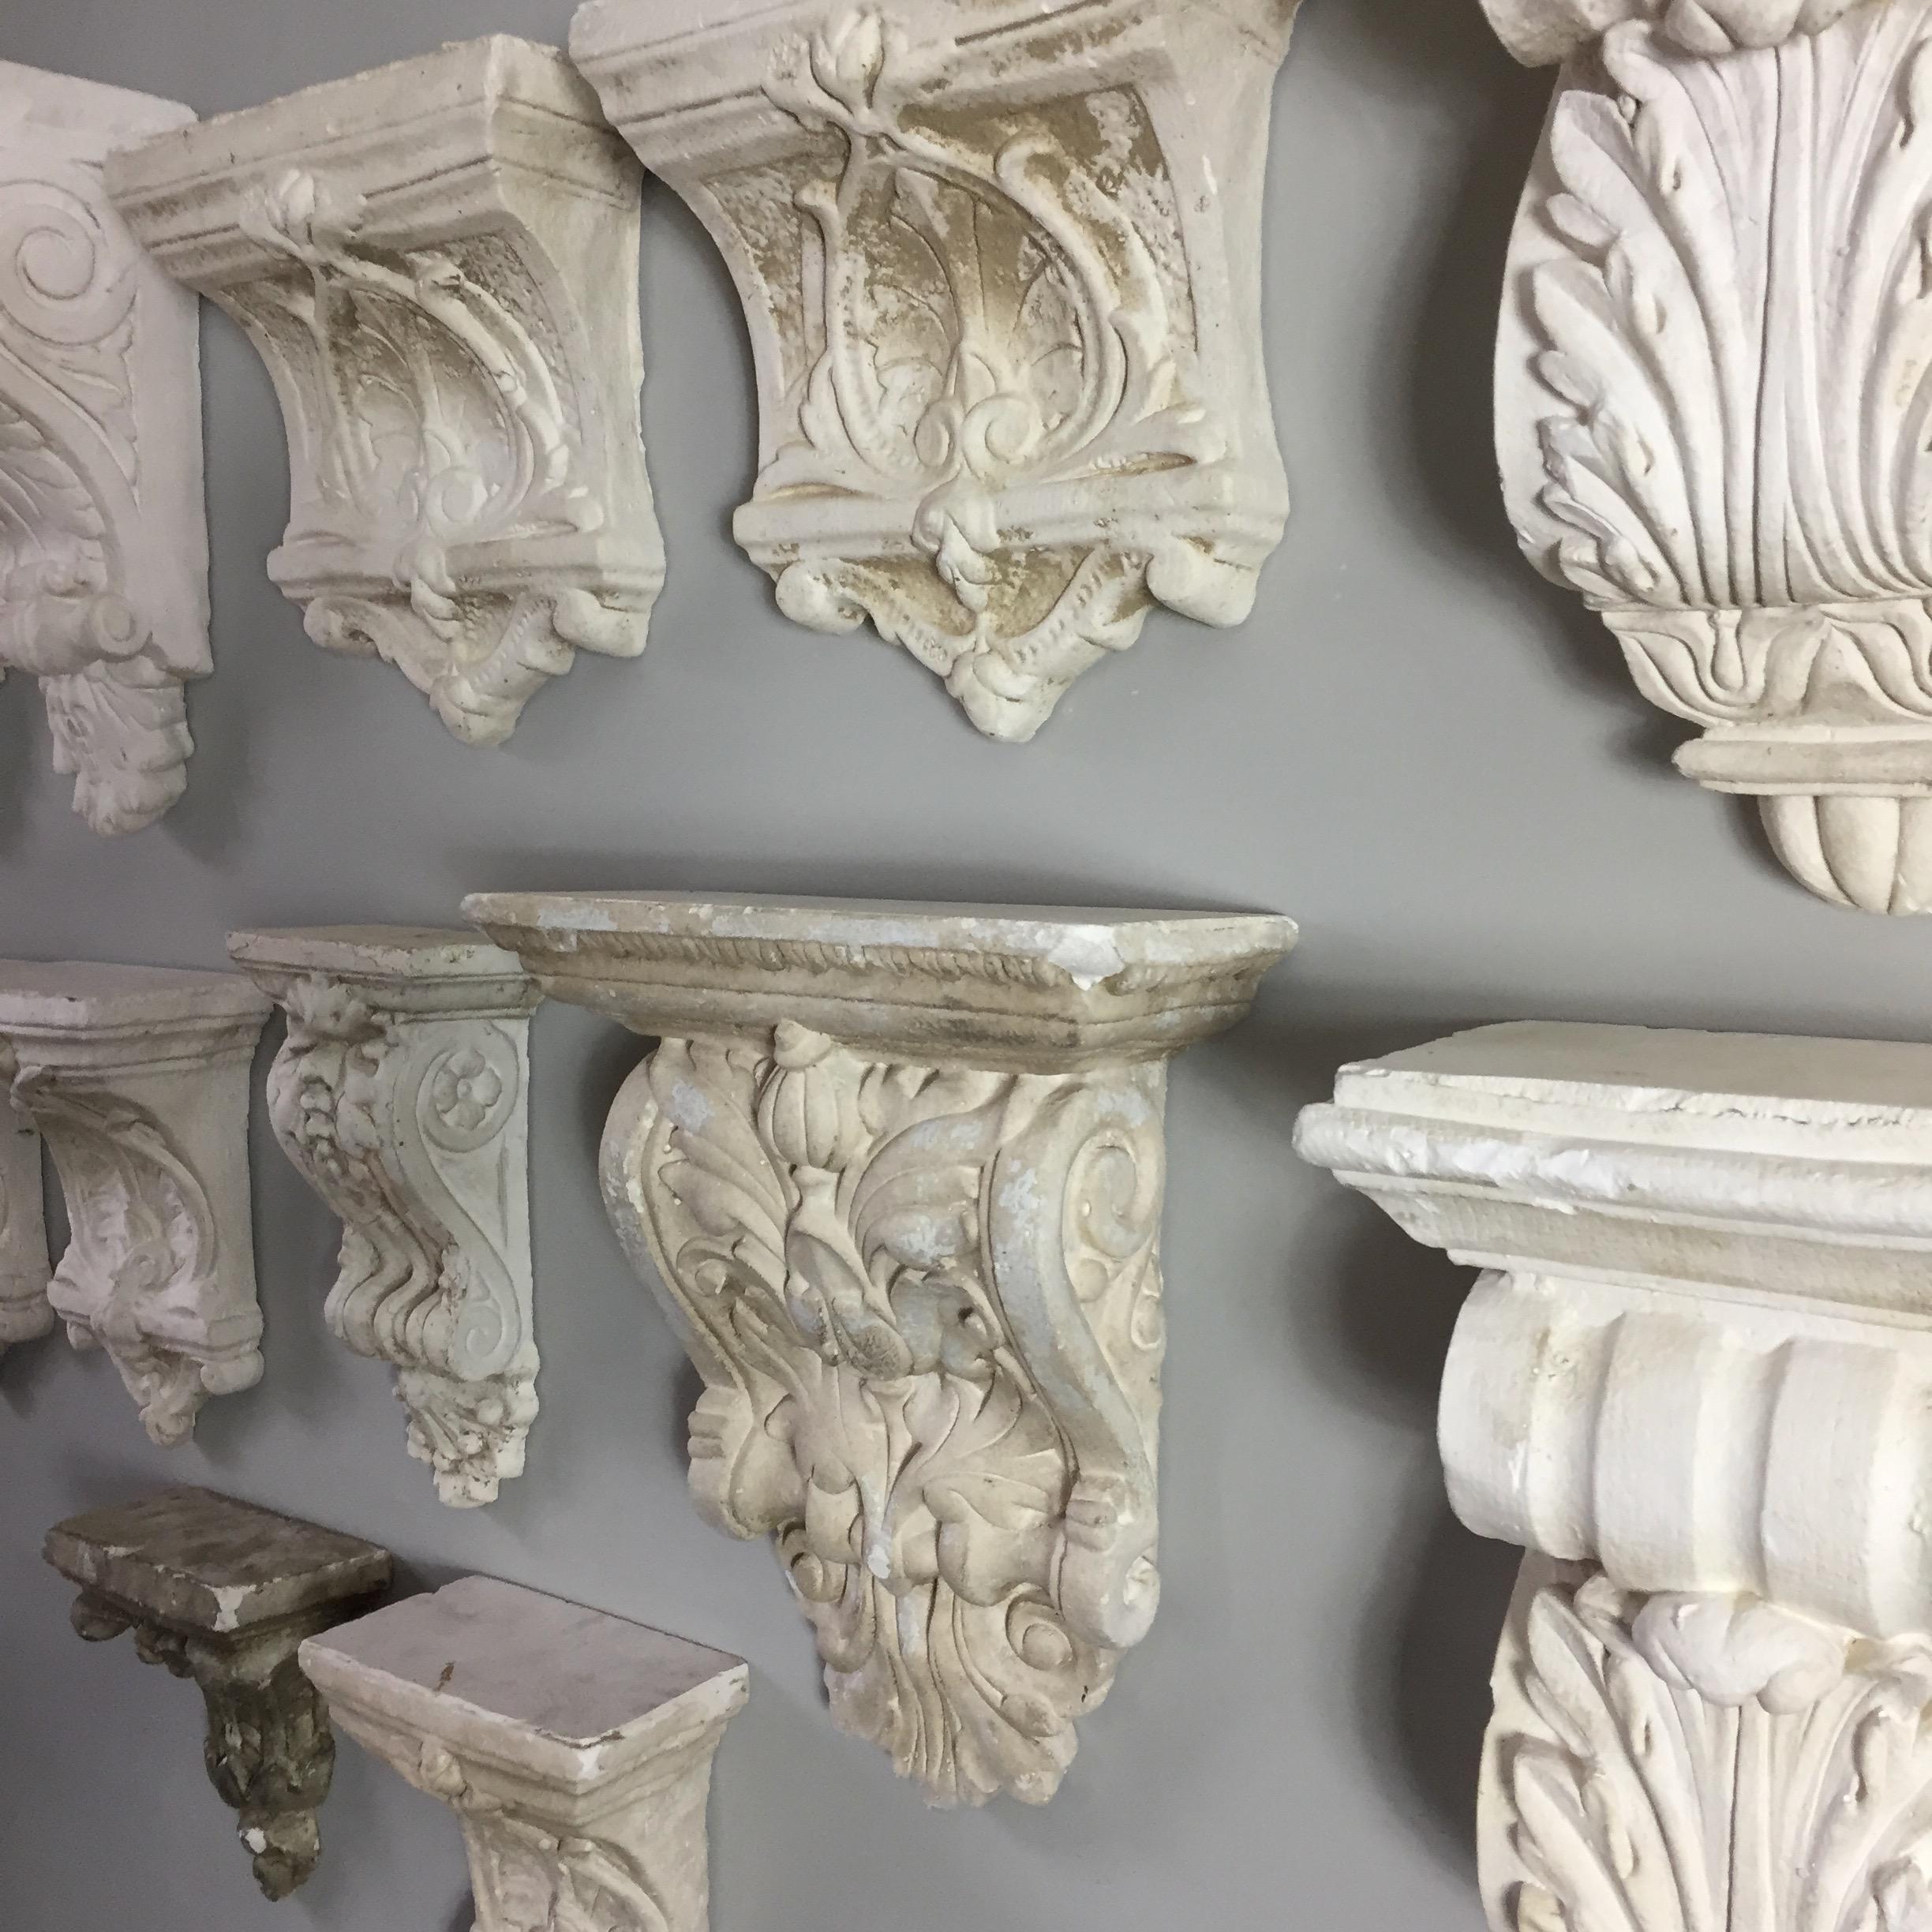 English Decorative Group of 12 Plaster Architectural Corbels